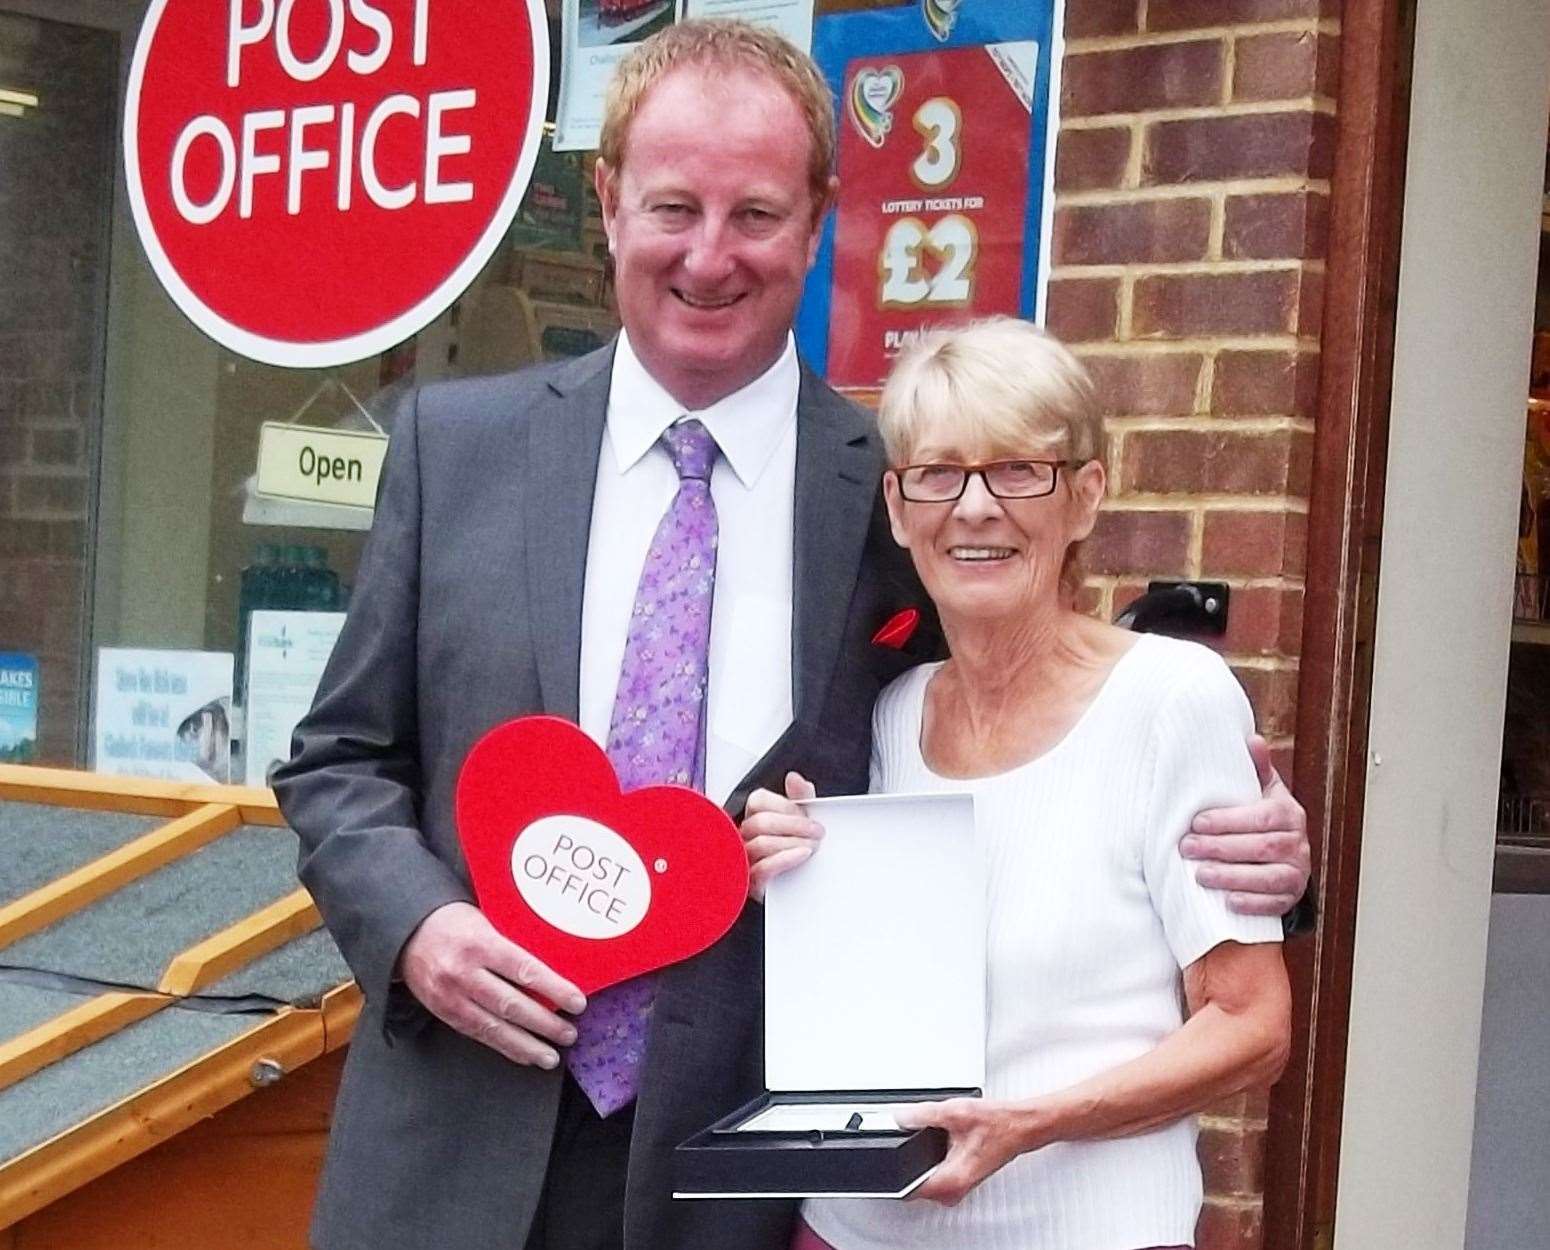 Angela Puxted receives her 30-year Post Office service award from Peter Wilkinson, Post Office area manager, in 2014